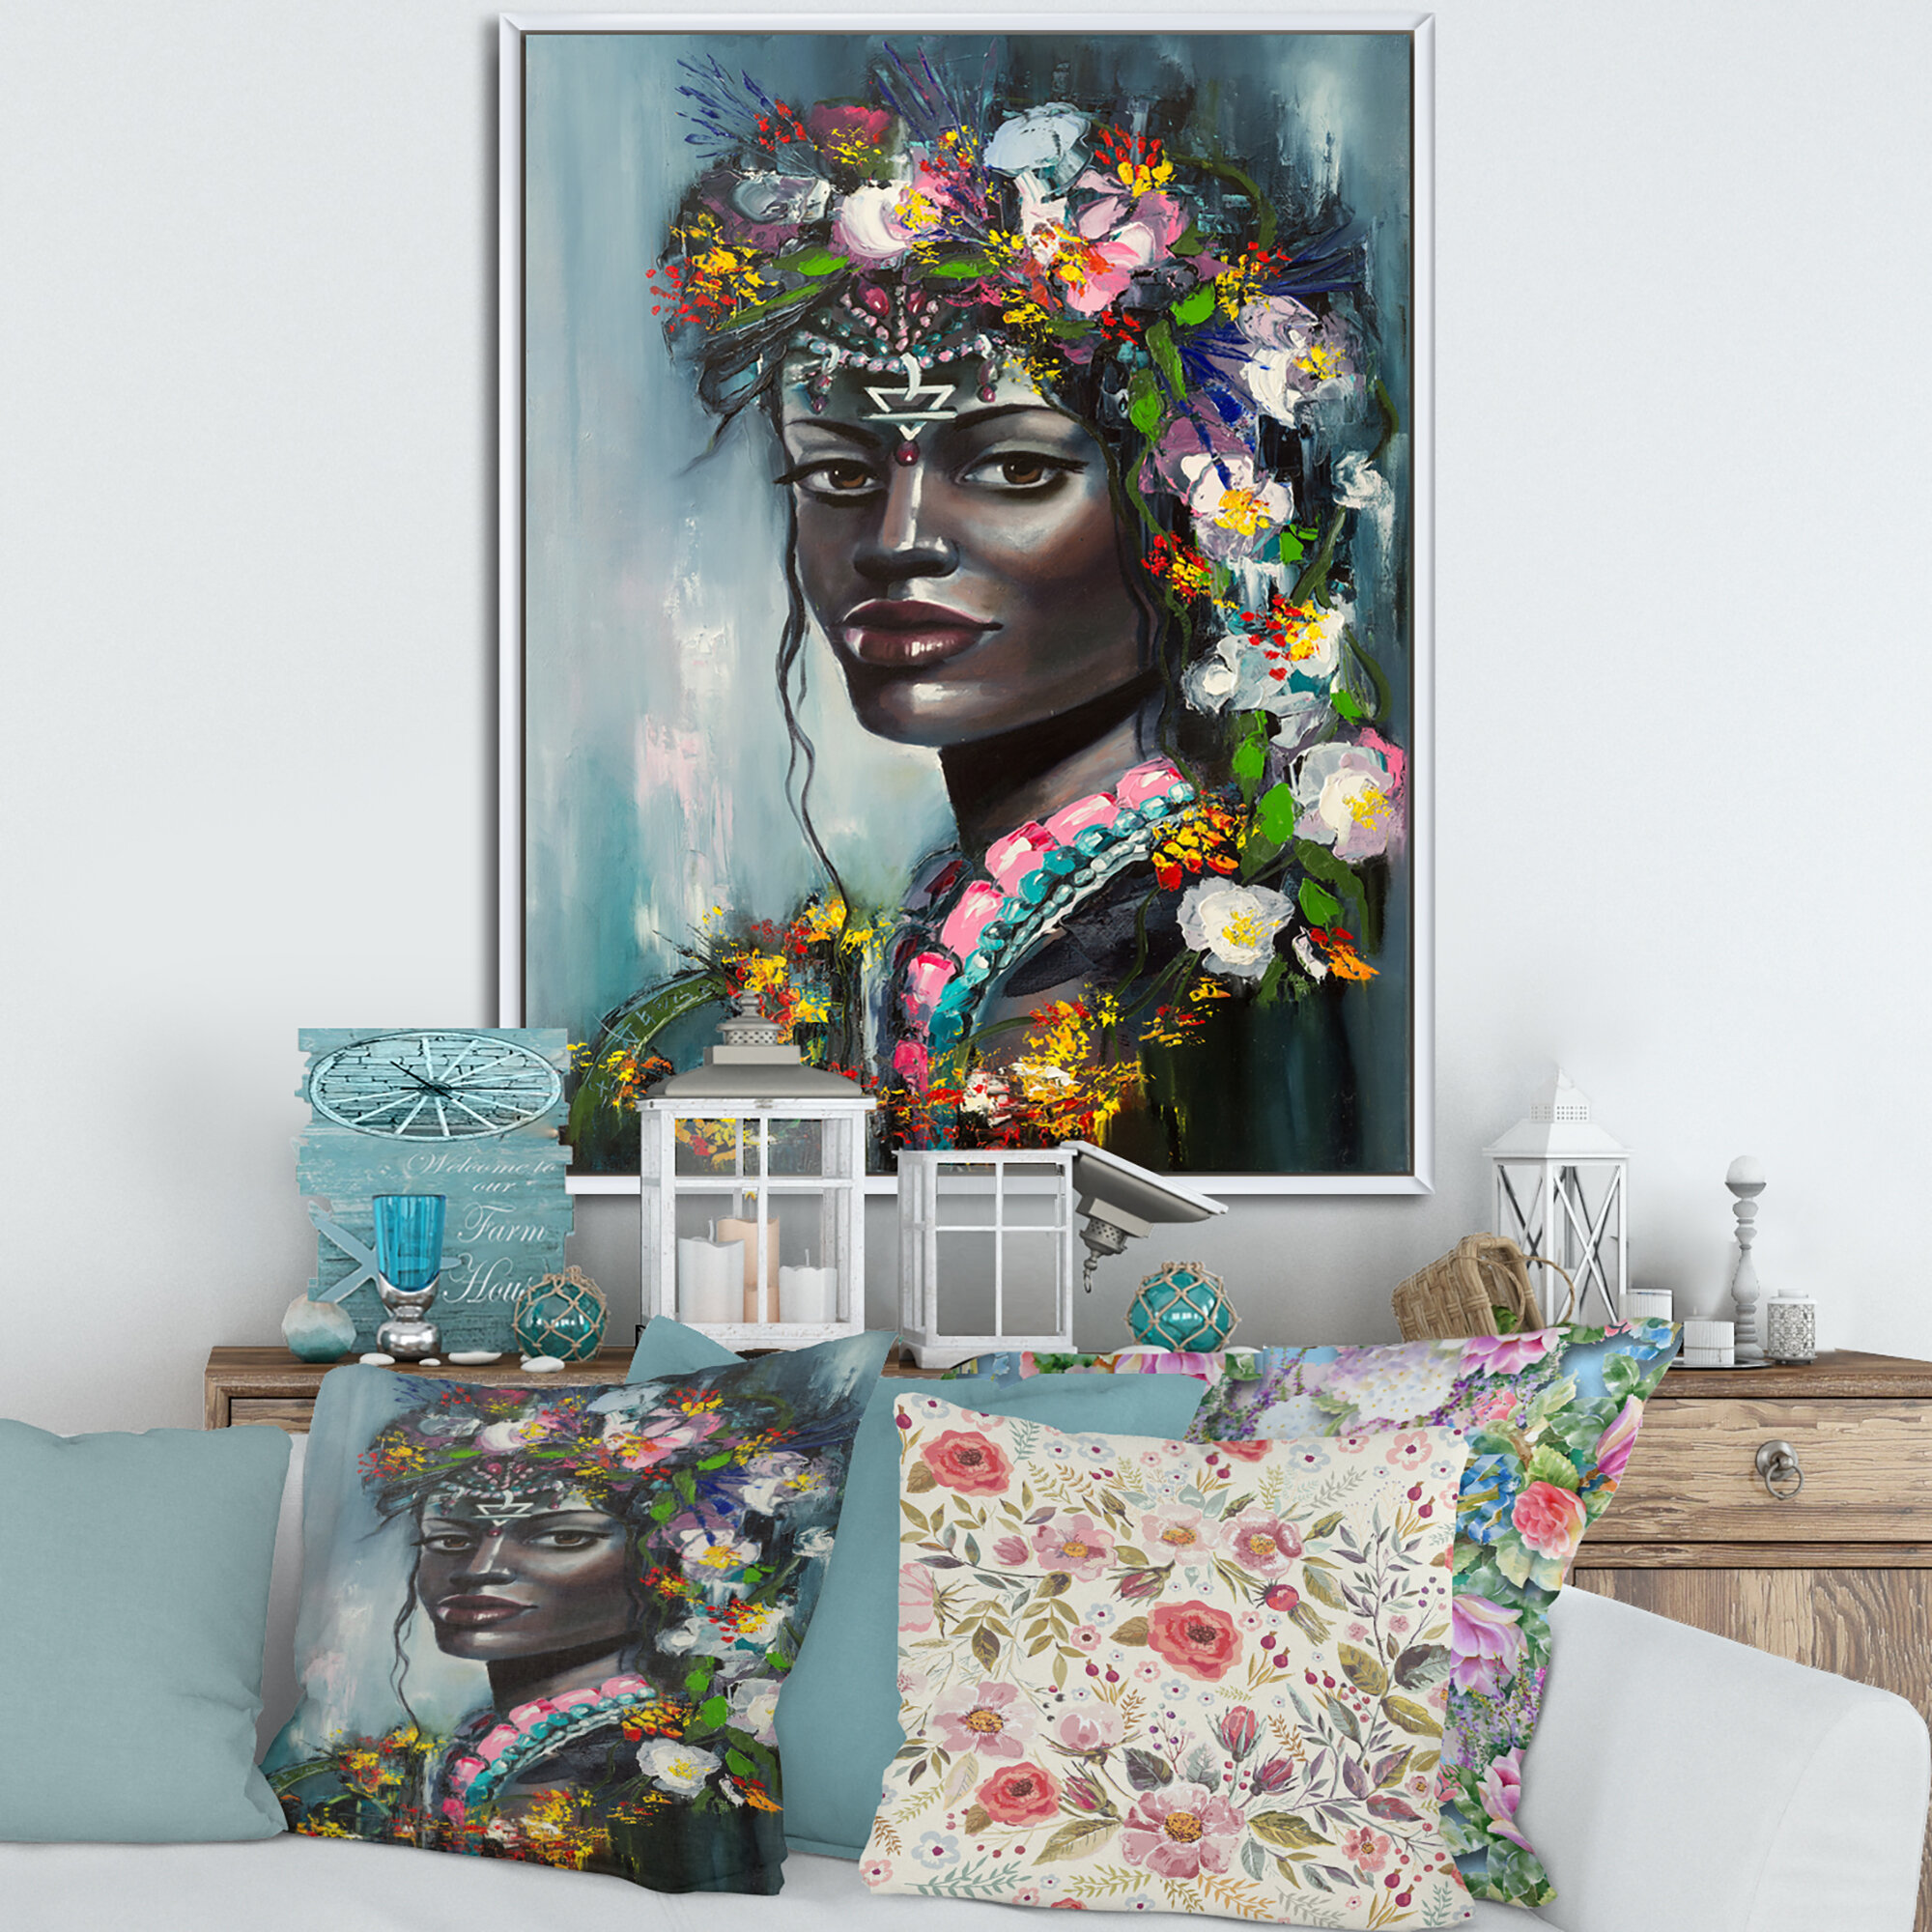 Bless international Portrait Of Traditional Afro American Woman Framed On Canvas  Painting Wayfair